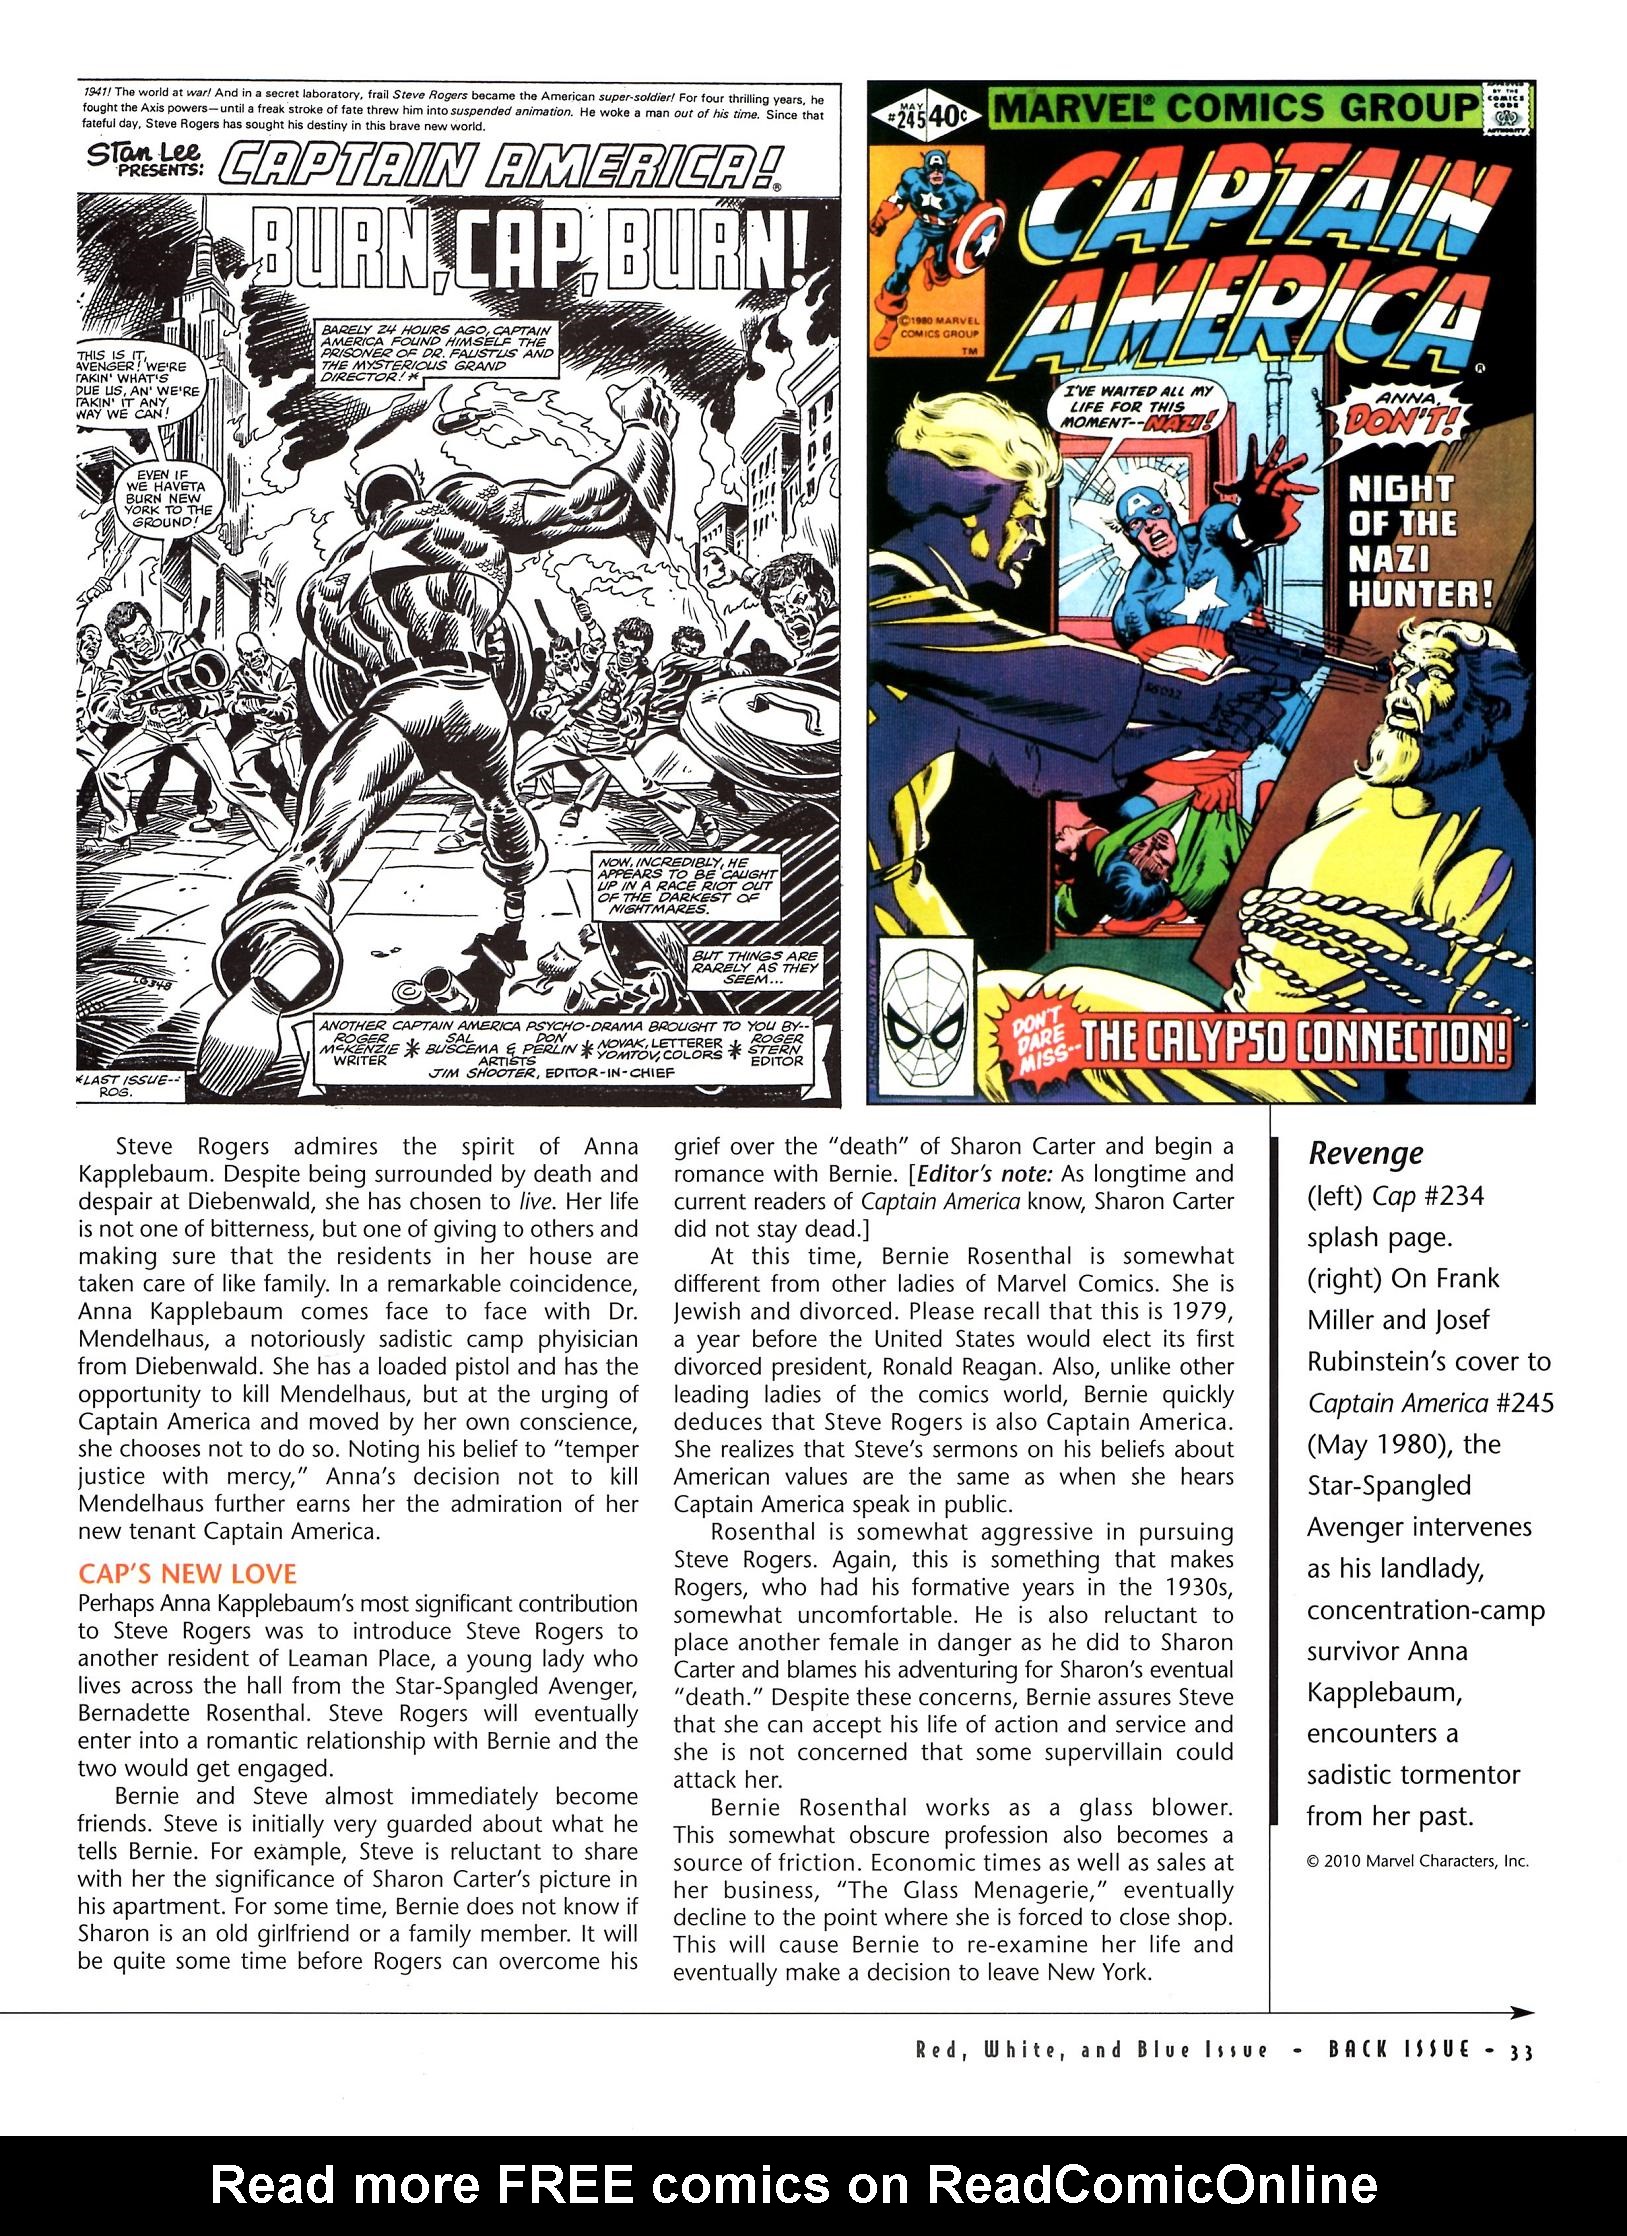 Read online Back Issue comic -  Issue #41 - 35